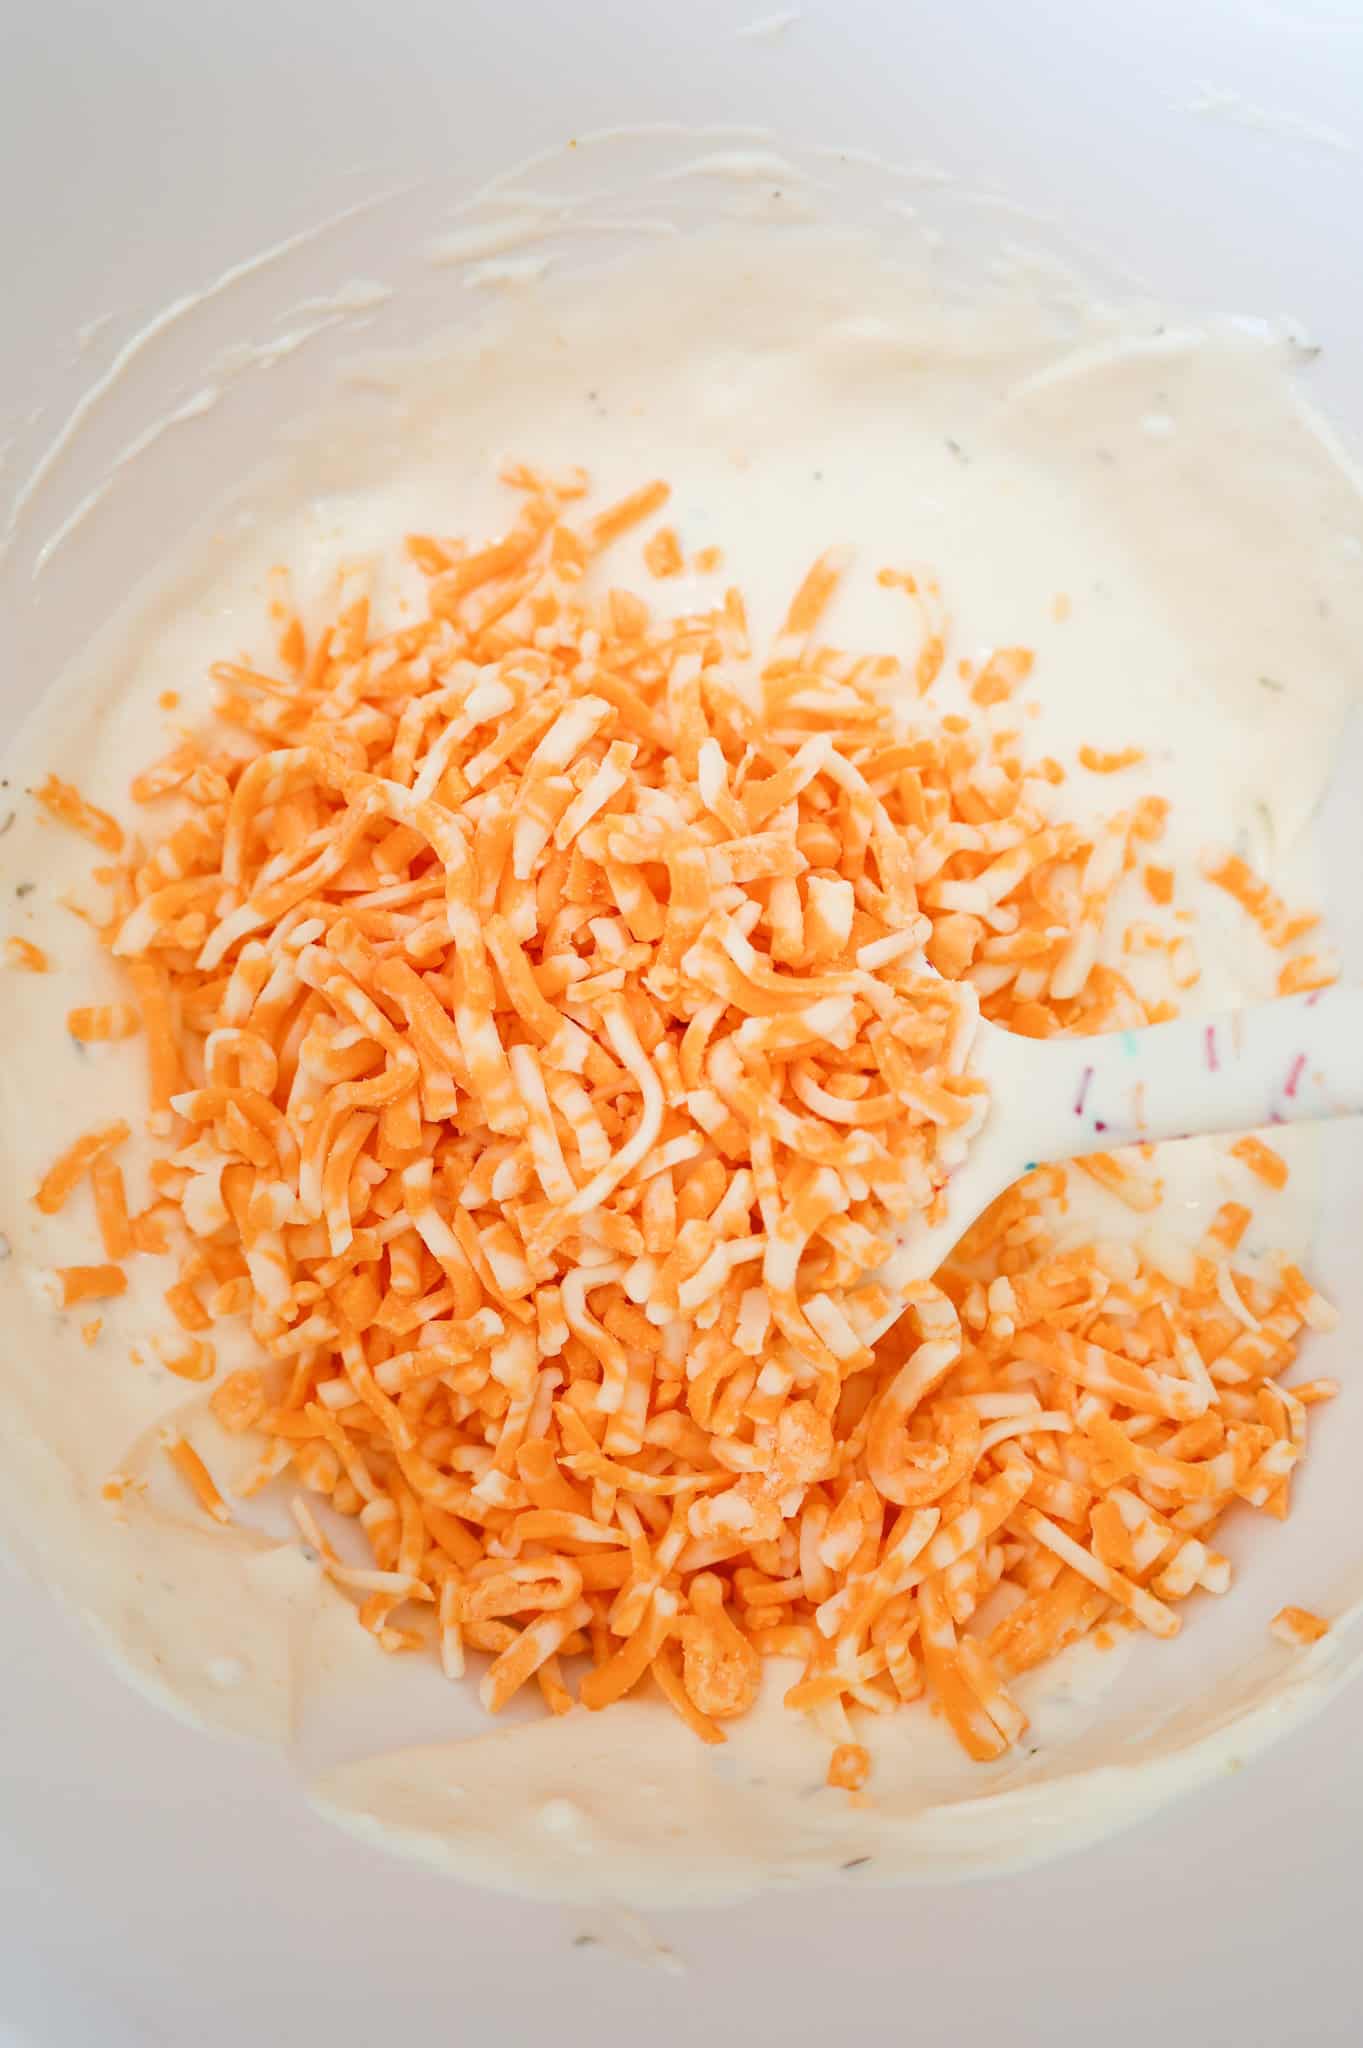 shredded cheddar on top of mayo and ranch dressing in a bowl